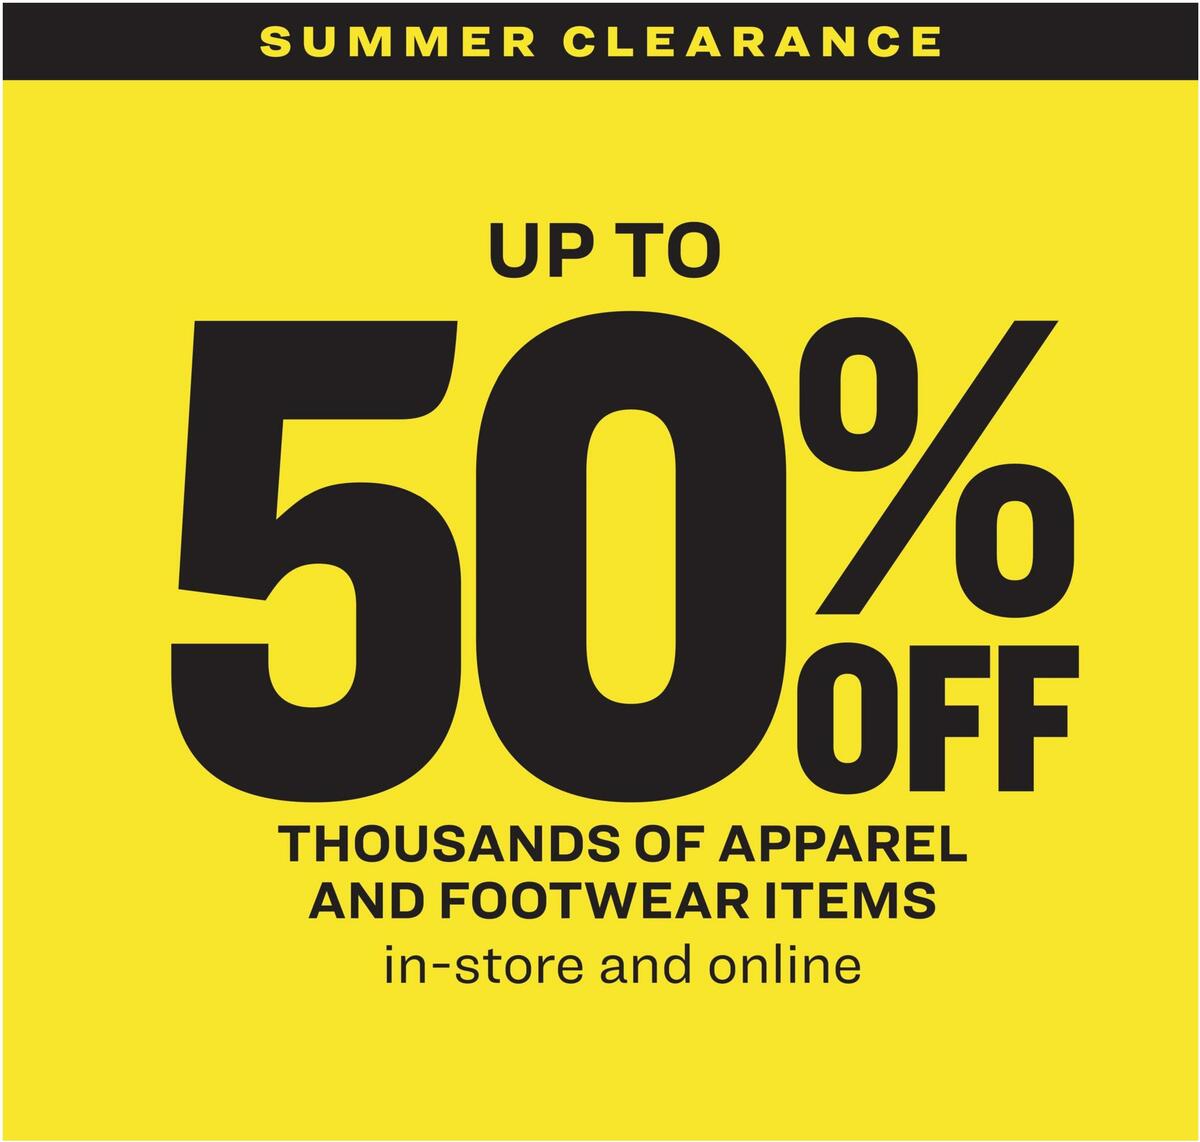 Academy Sports + Outdoors Outdoor Ad Weekly Ad from June 22